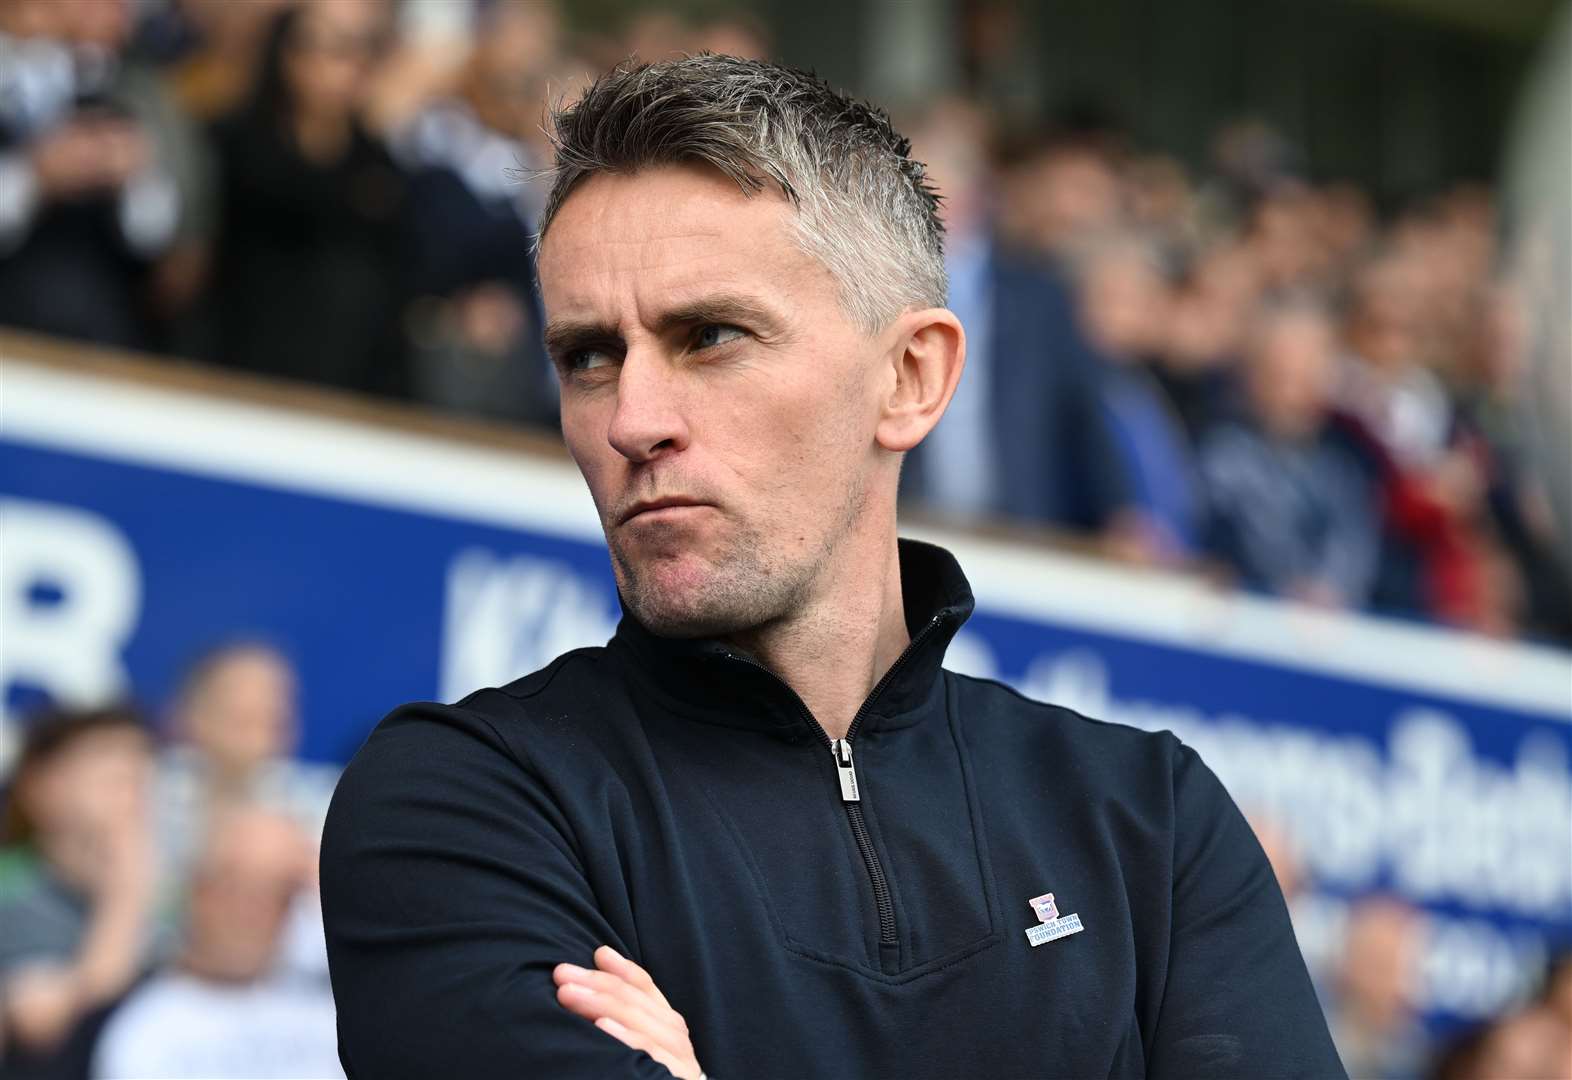 If It’s Possible I will Terminate My Contract Deal: Ipswich Town Coach Kieran McKenna Firmly Denies Allegations, Asserts Refusal to Accept Pay Cut